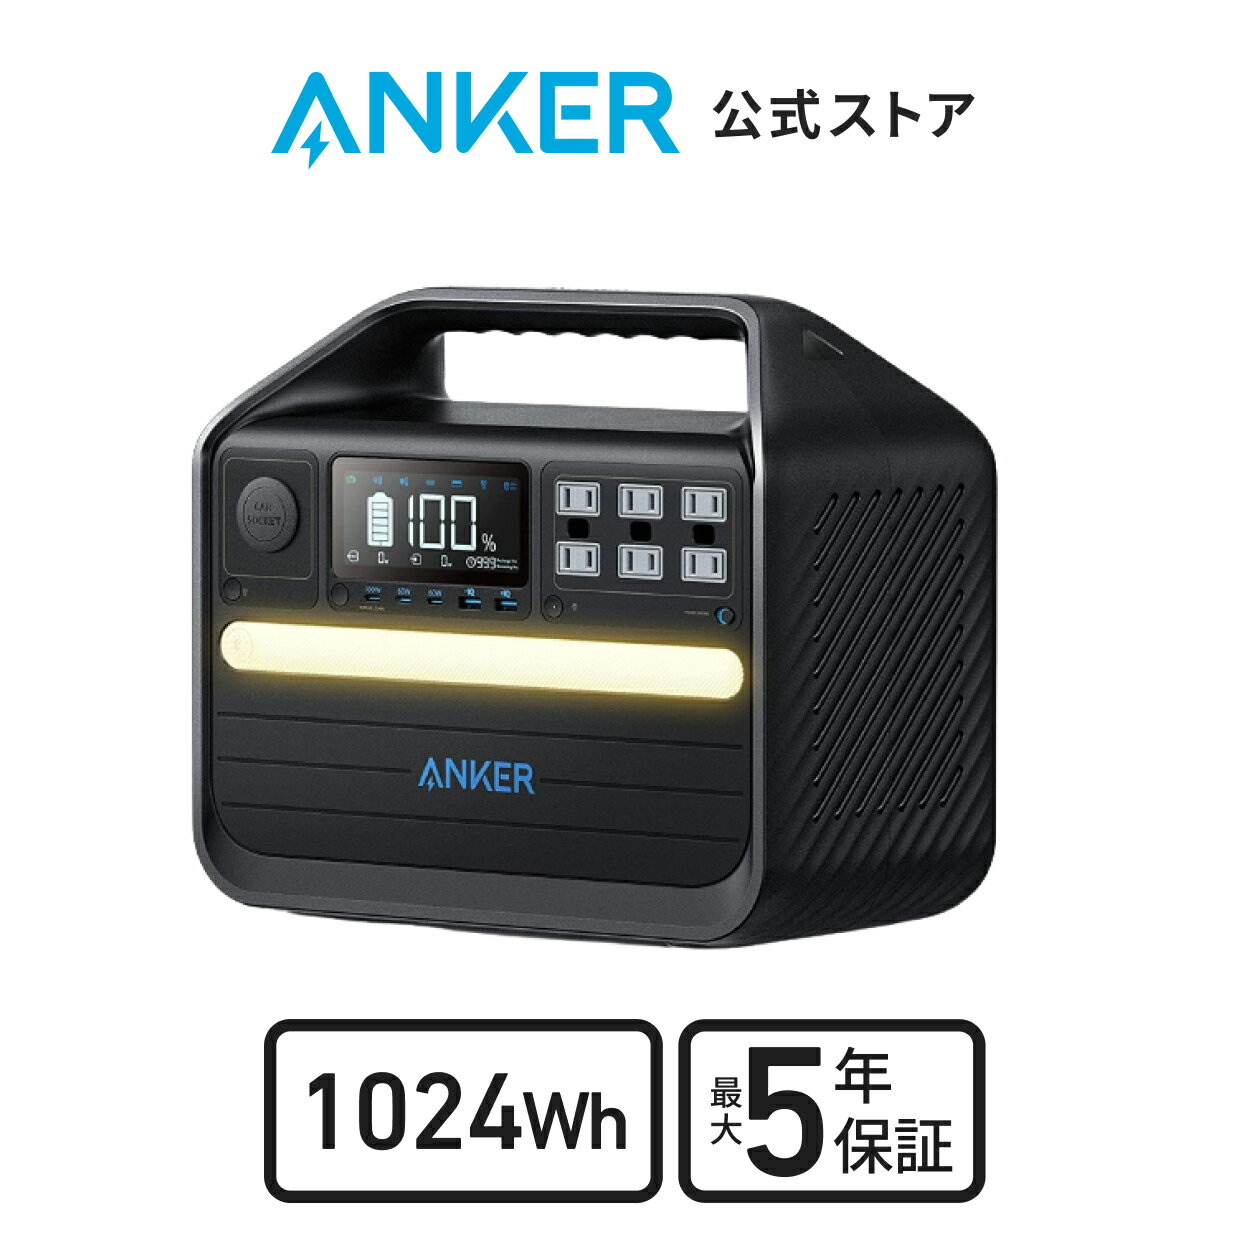 Anker 555 ポータブル電源 1024Wh 定格100